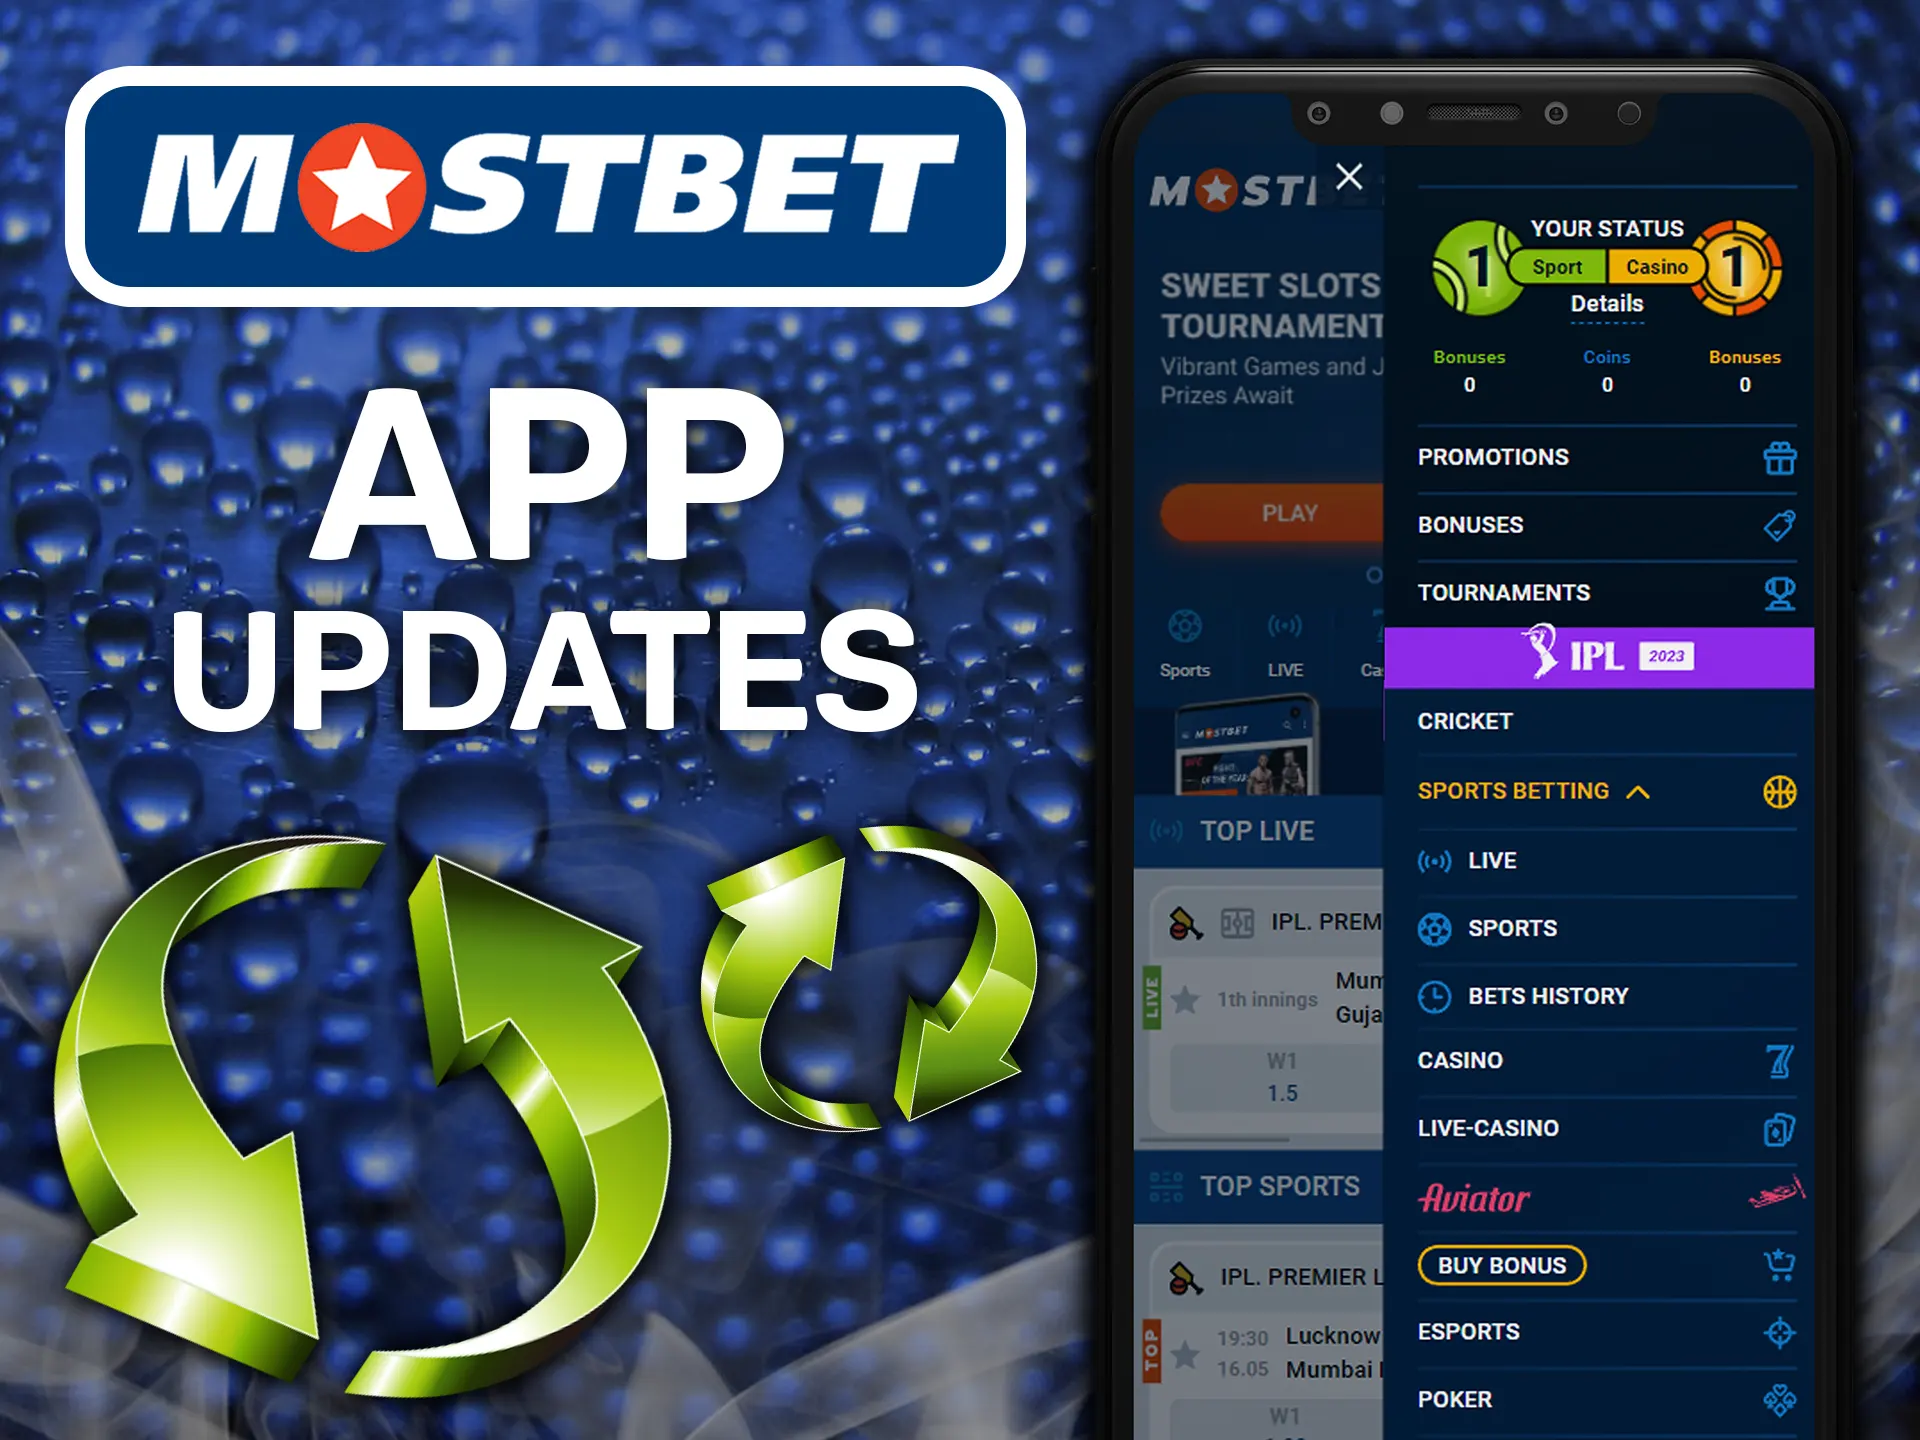 The Ultimate Guide To Online casino and betting company Mostbet Turkey